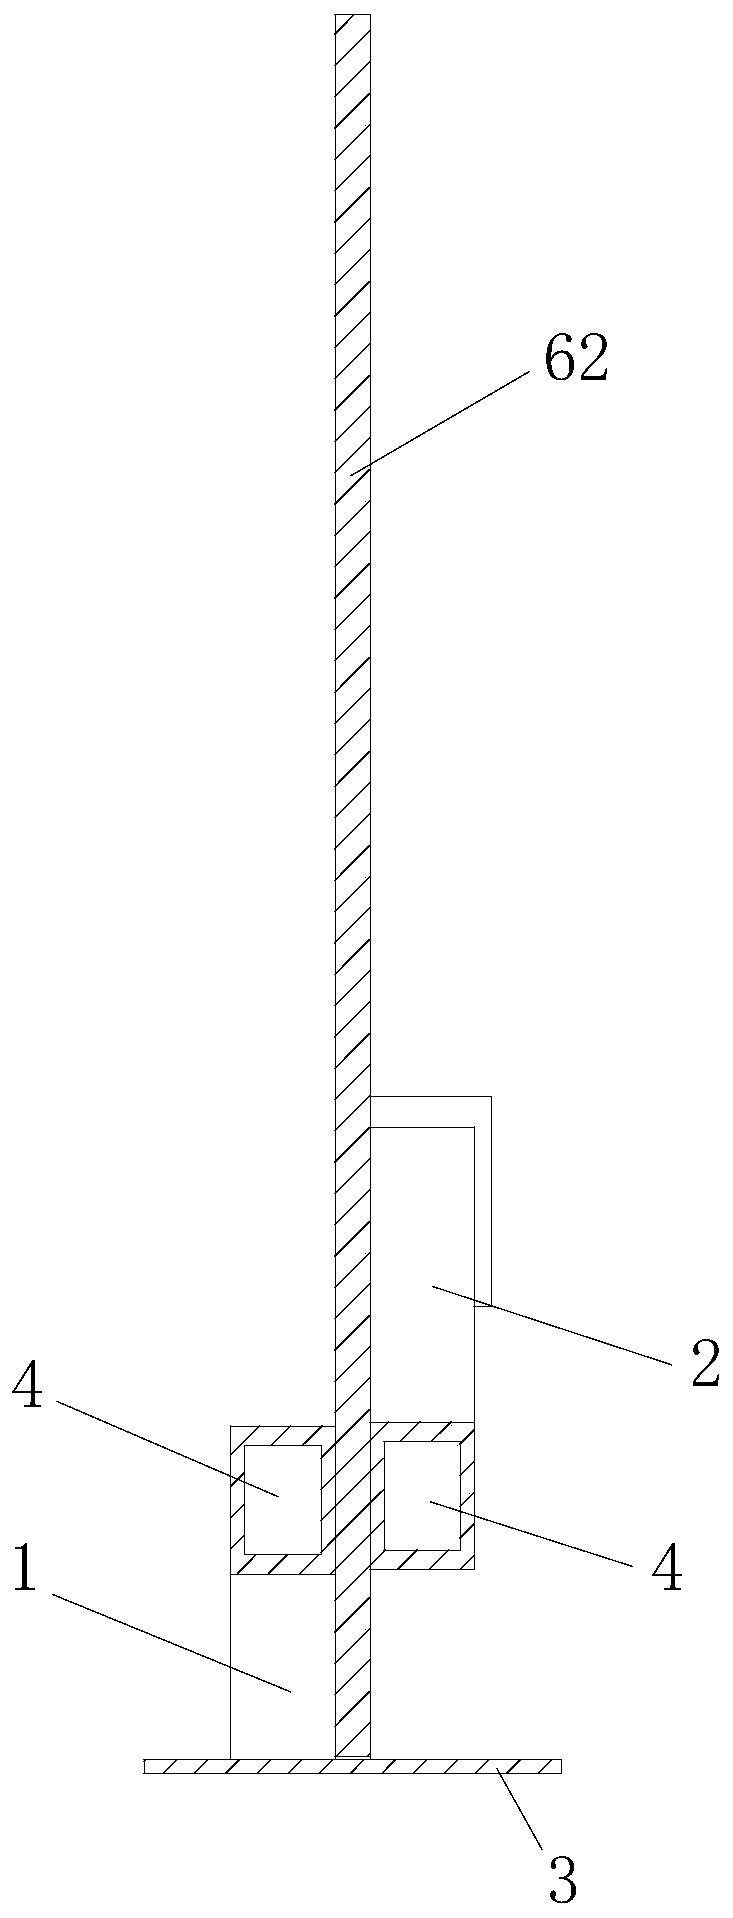 Reinforcing device and method used for constructing concrete wall as well as concrete wall